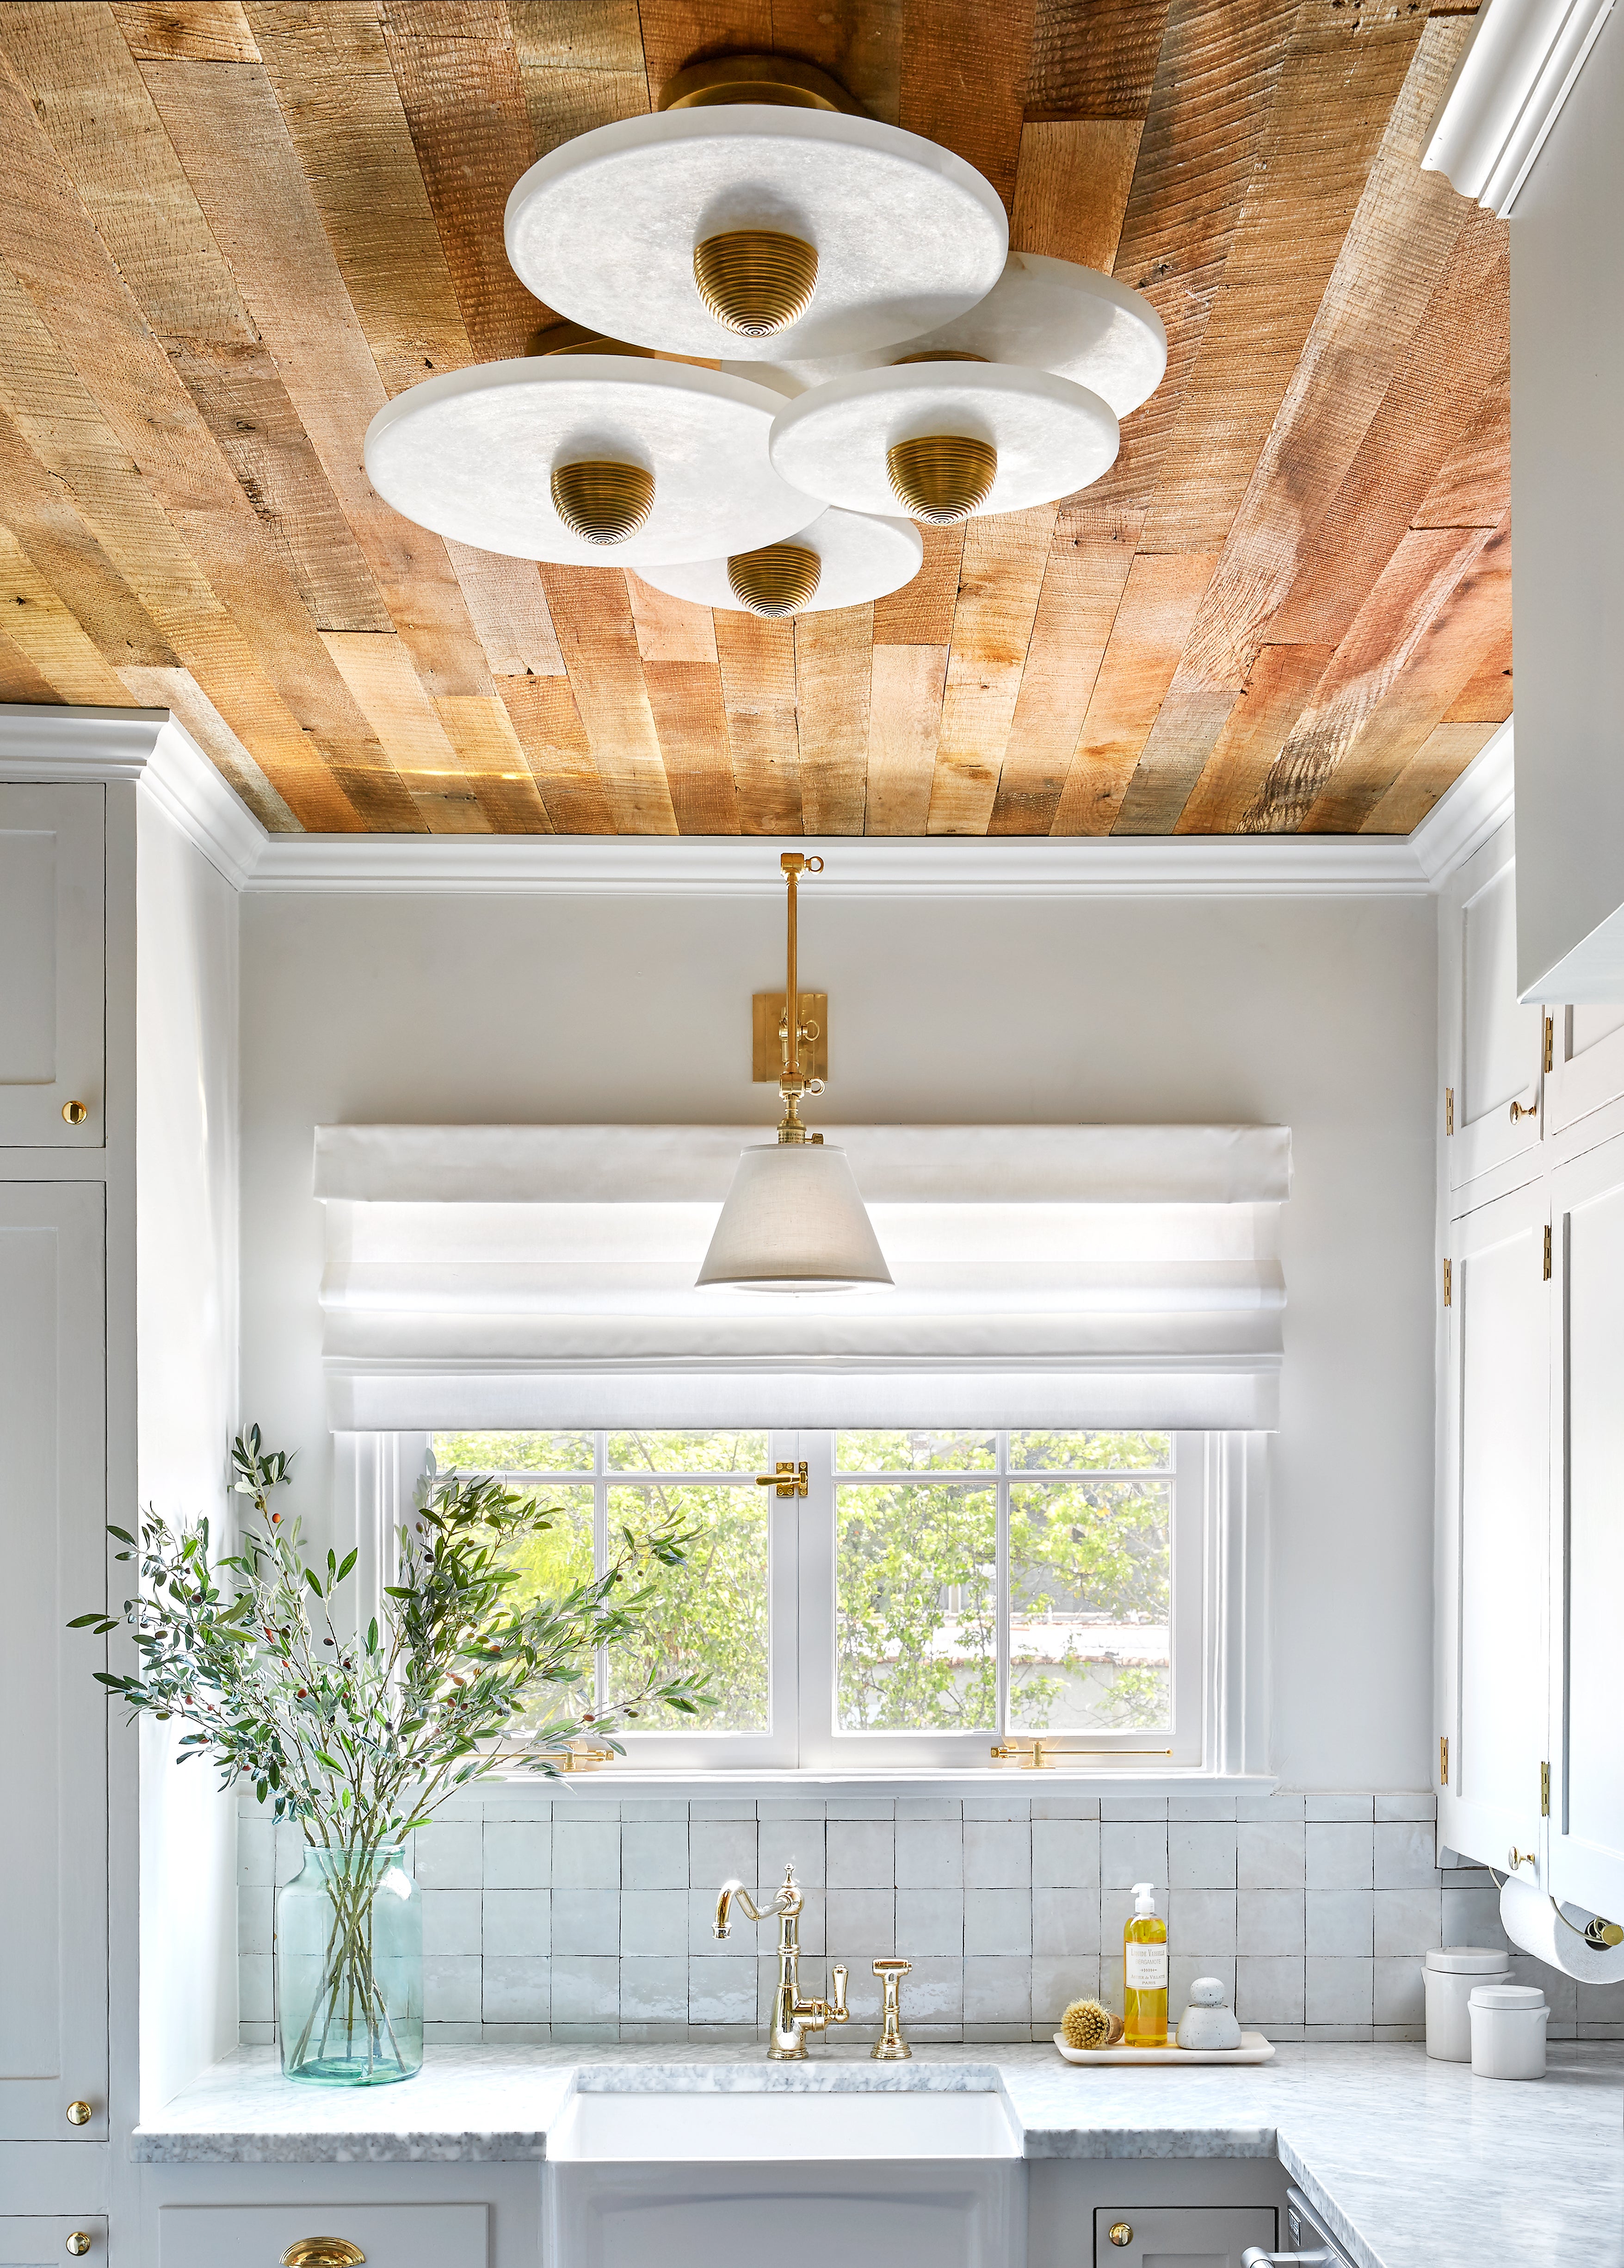 Wood Ceilings In Her Kitchen